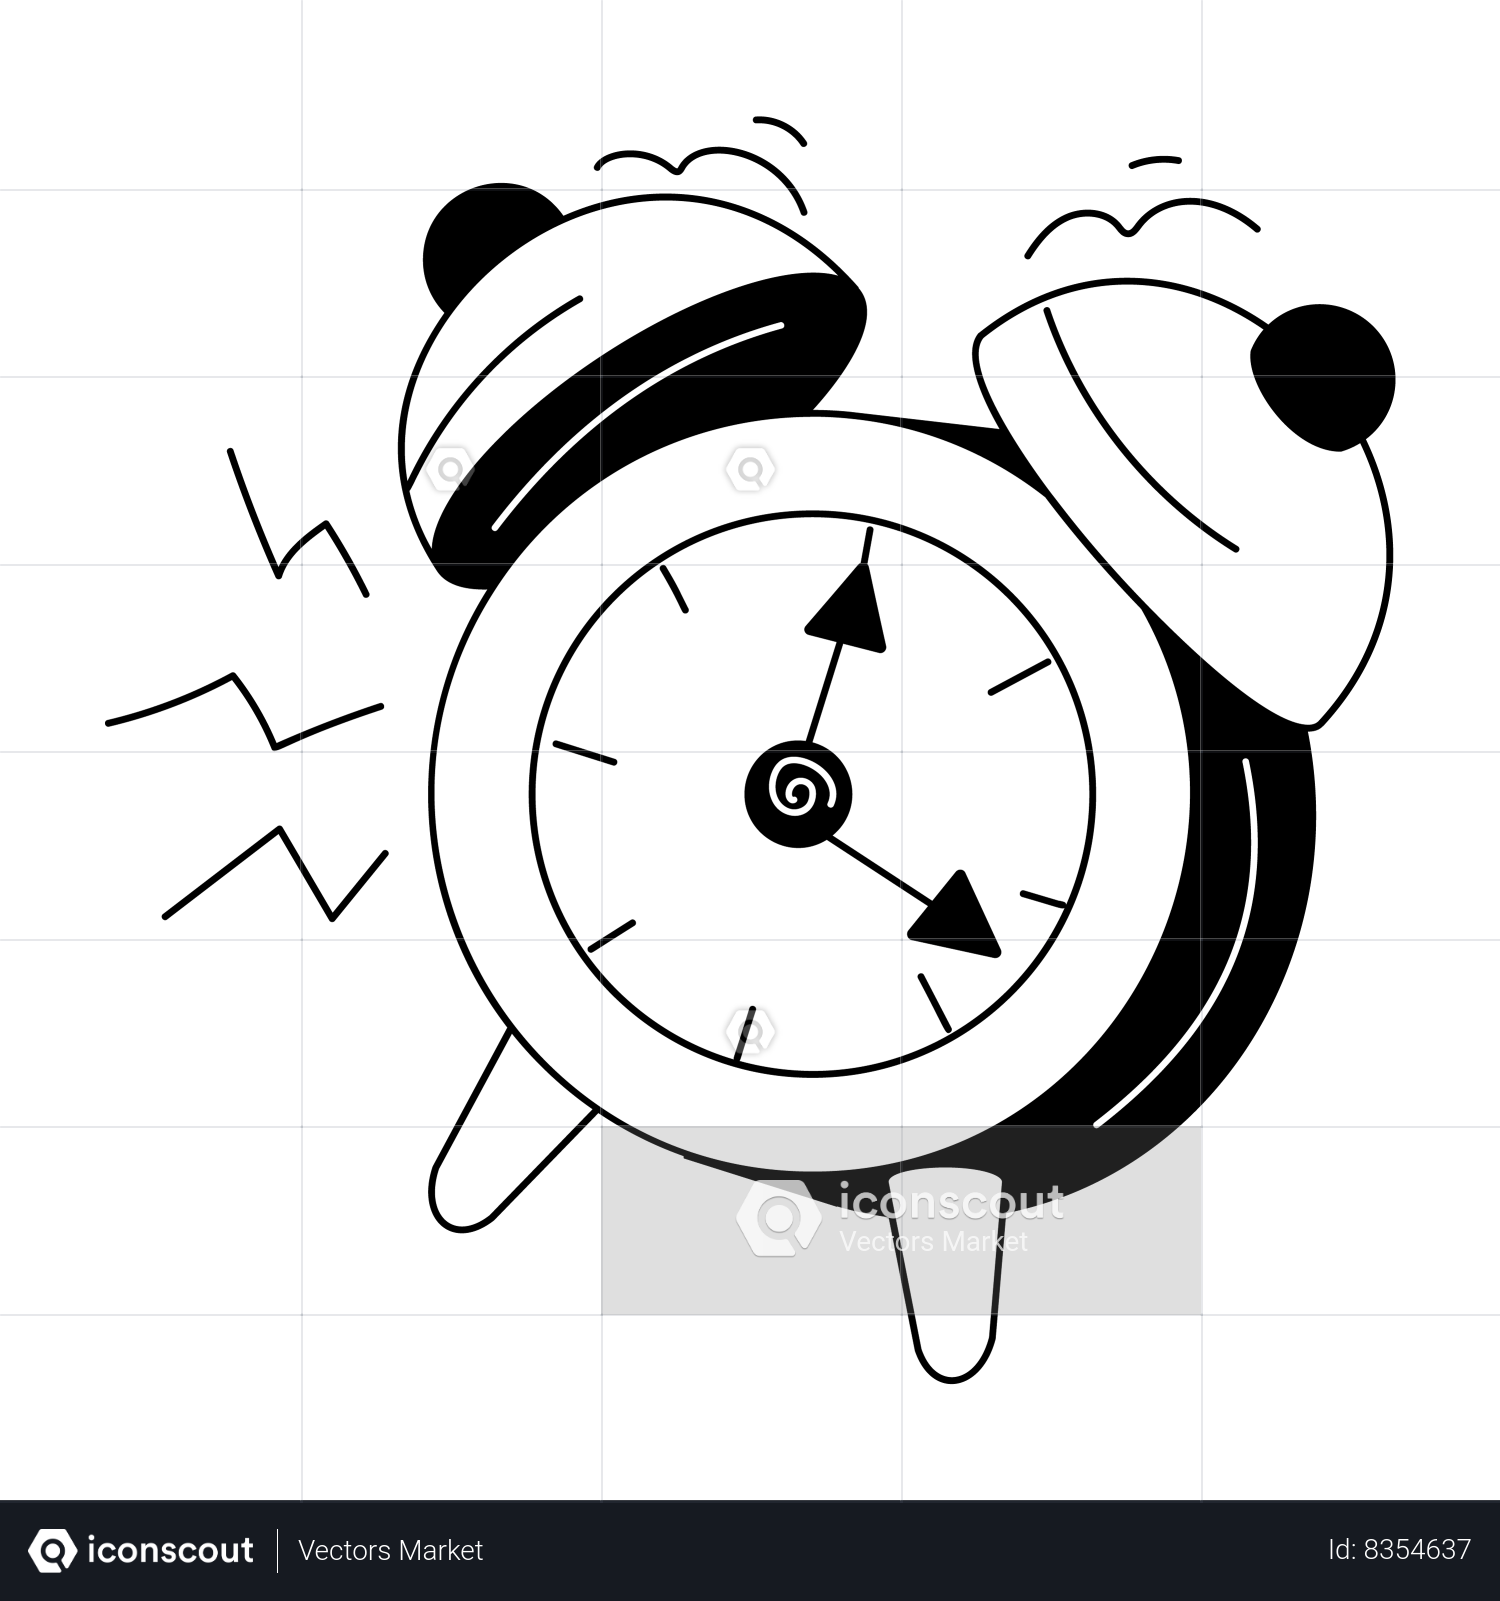 Premium Vector | Illustration of business man successfully juggling managing  time successful time management metaphor one line art style